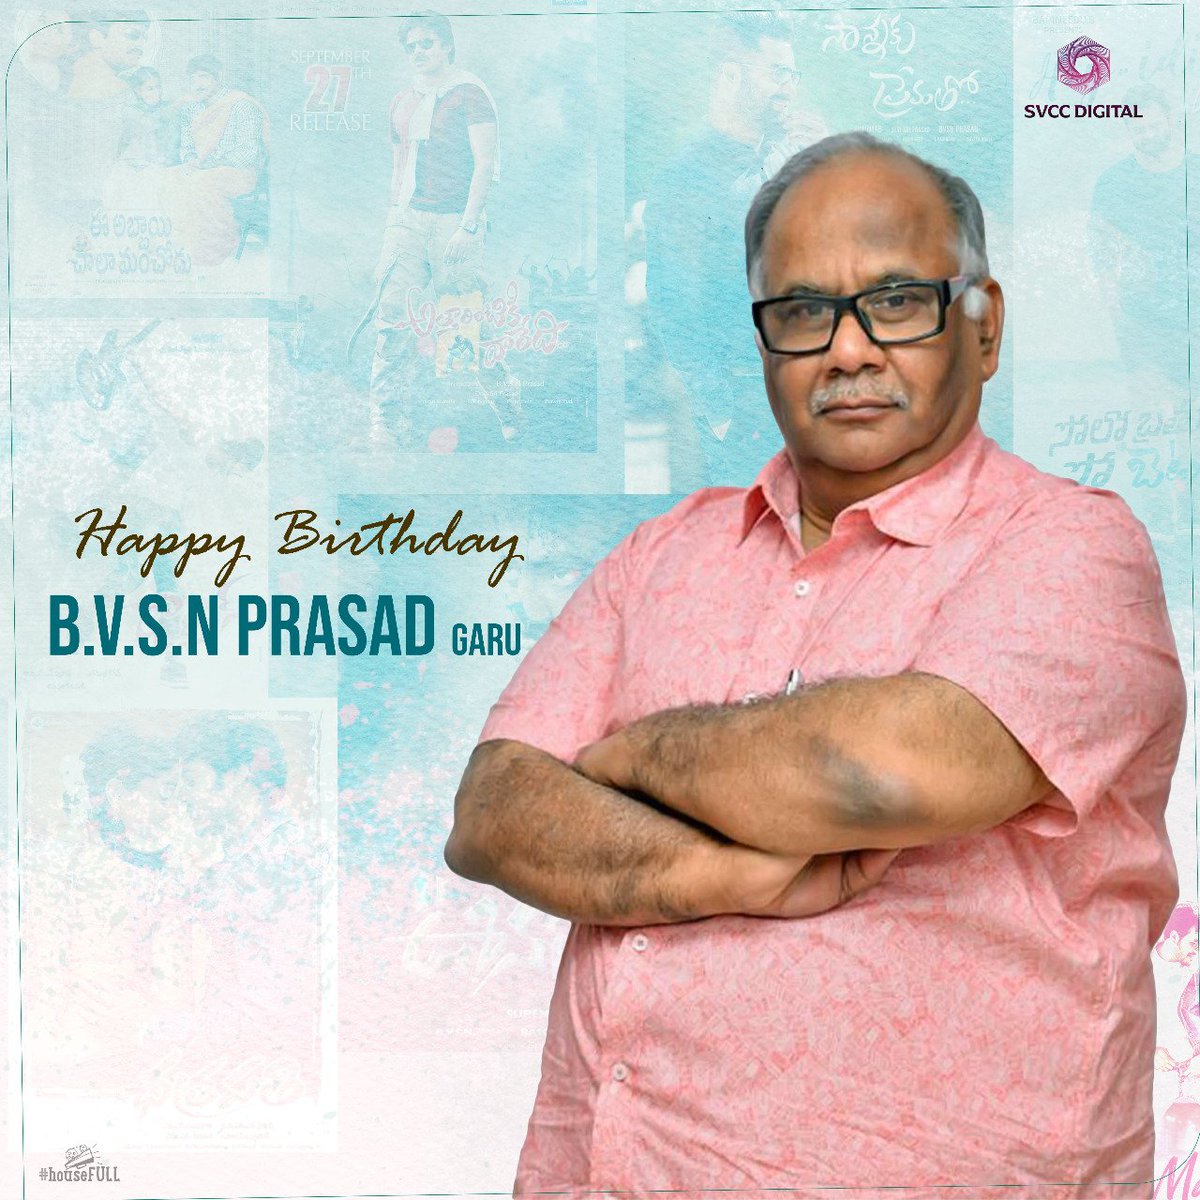 Join us in wishing our dearest producer @BvsnP Garu a very Happy Birthday. Wishing you a Blockbuster year ahead. #HBDBVSNPrasad